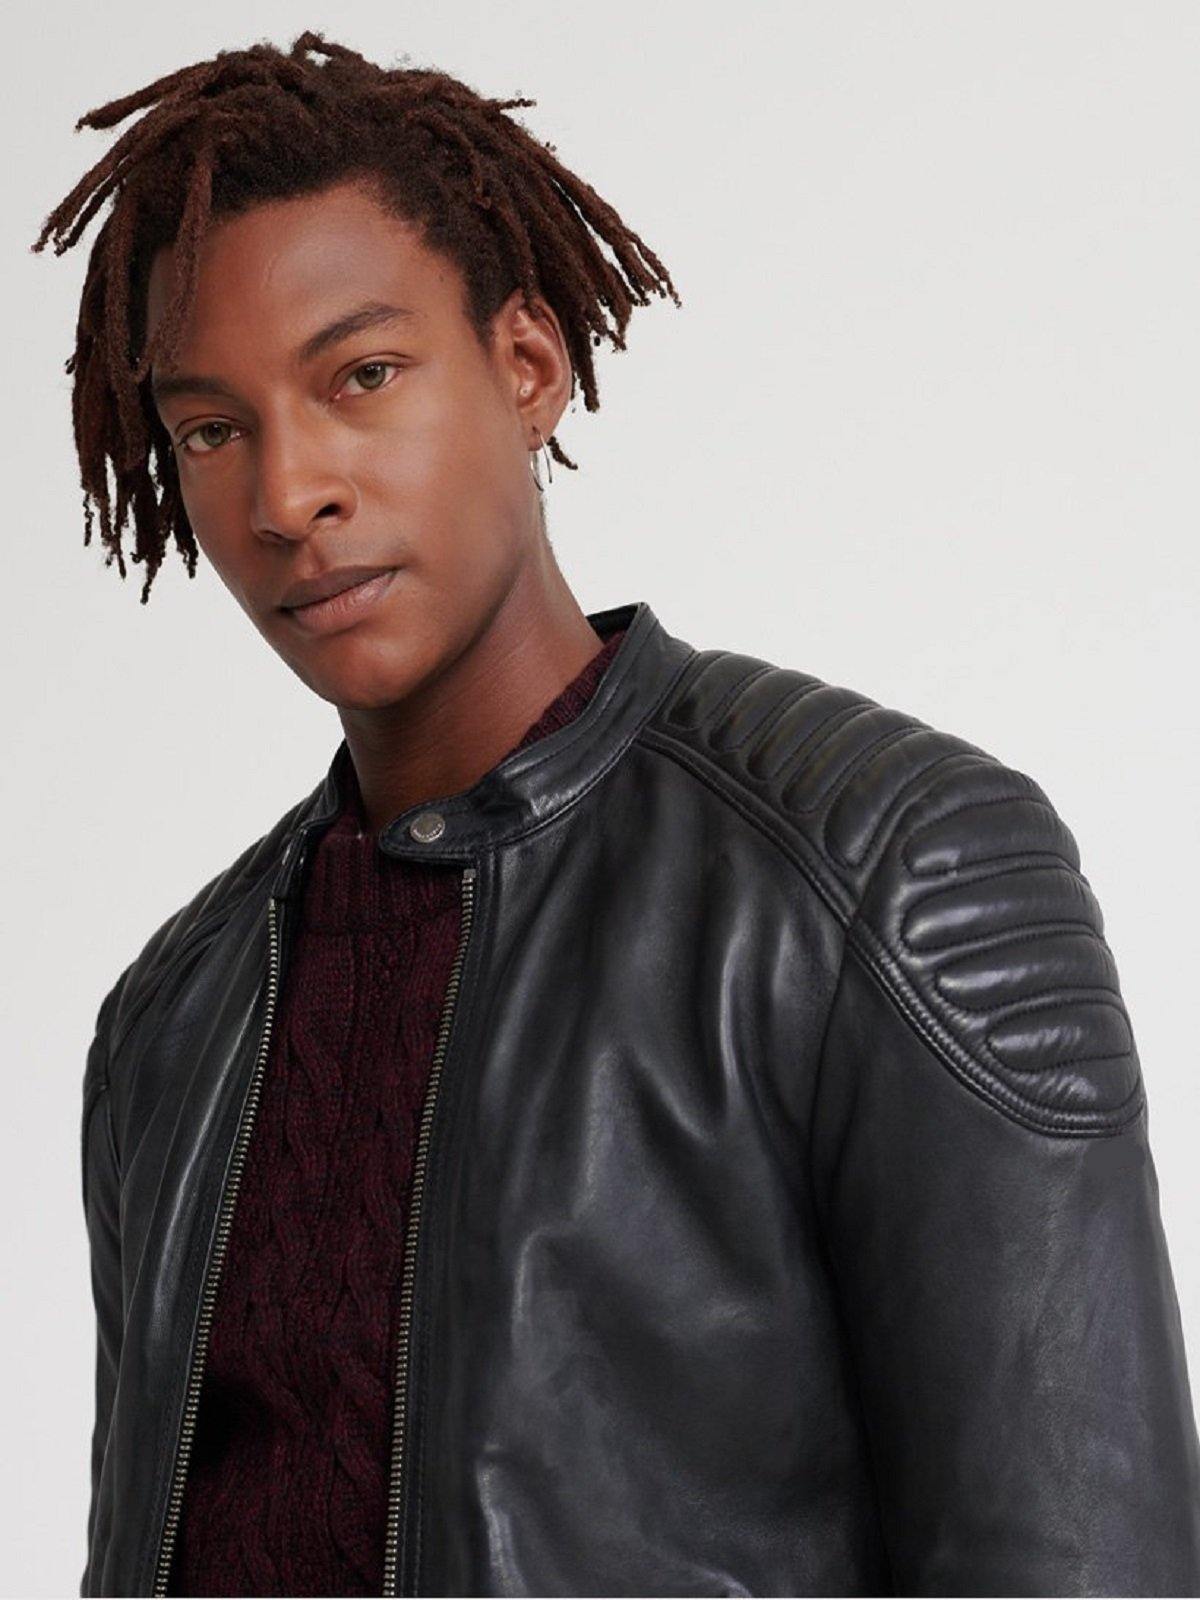 City Racer Leather Jacket For Men - Wiseleather